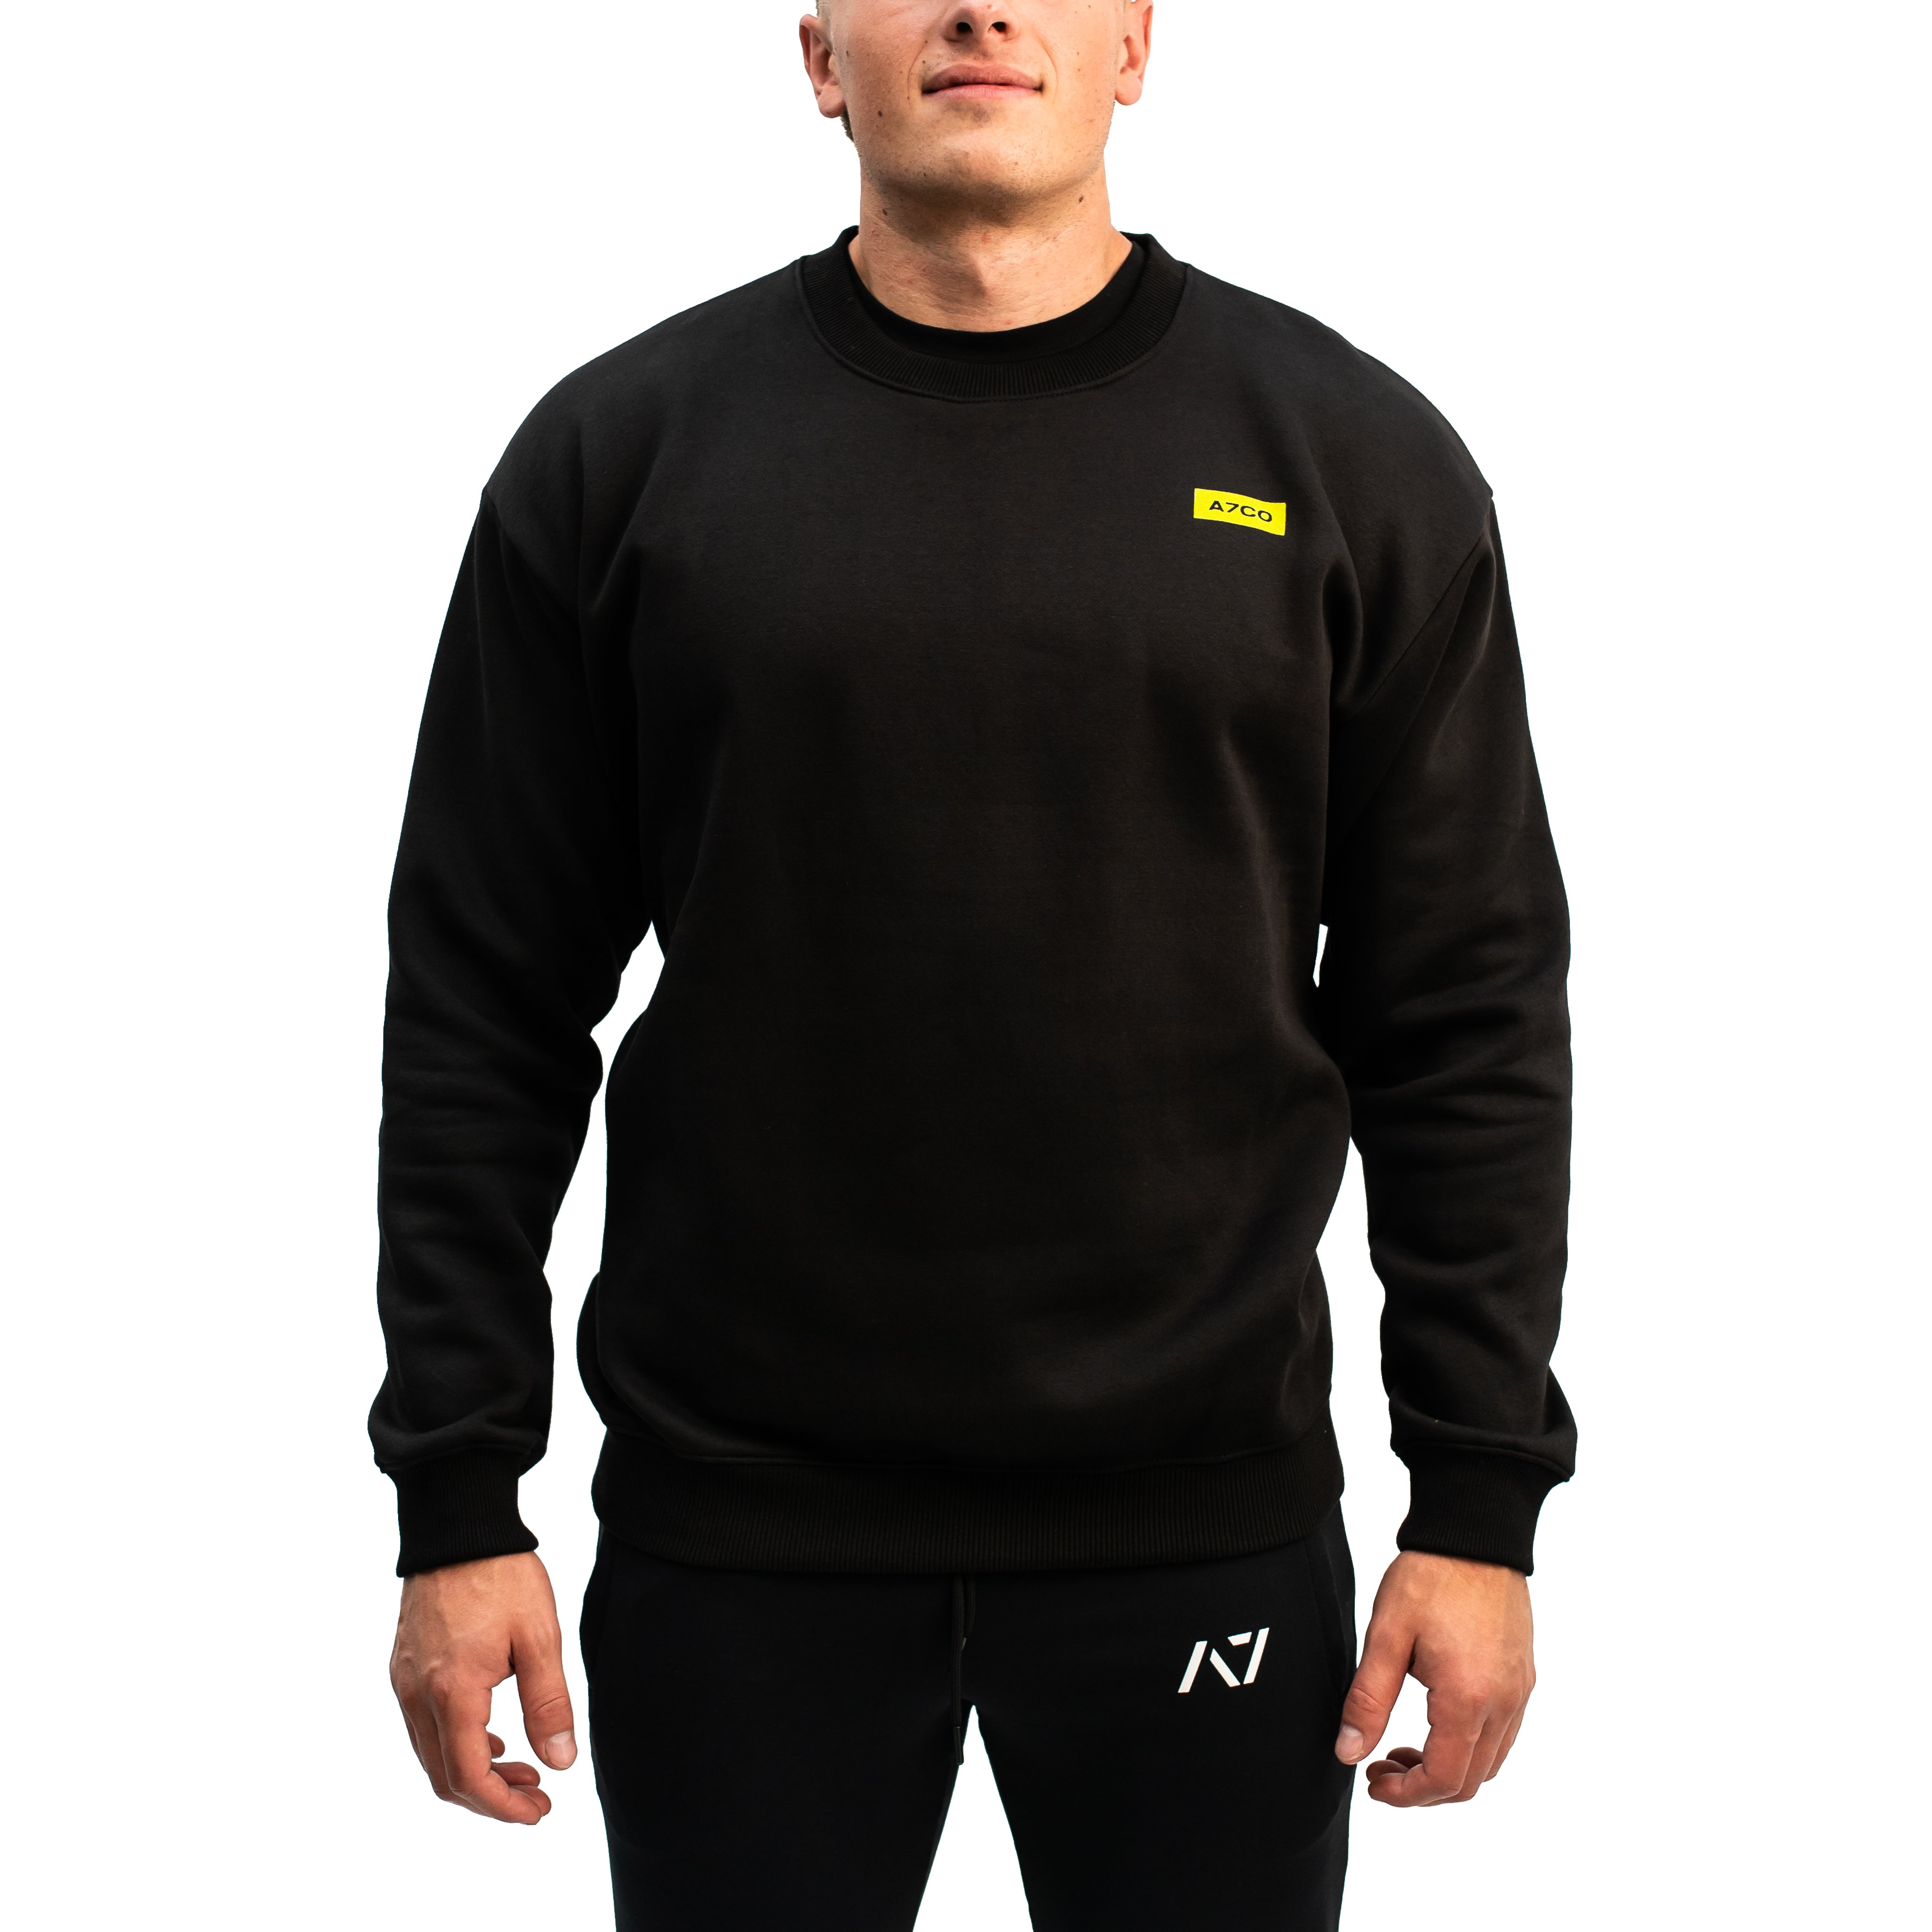 Gridlock Crew Neck is perfect for in and out of the gym. Purchase Gridlock Crew Neck from A7 UK. Purchase Gridlock Crew Neck in Europe from A7 Europe Best gymwear shipping to UK and Europe from A7 UK. Gridlock is our newest crew neck Design. The best Powerlifting apparel for all your workouts. Available in UK and Europe including France, Italy, Germany, Sweden and Poland.